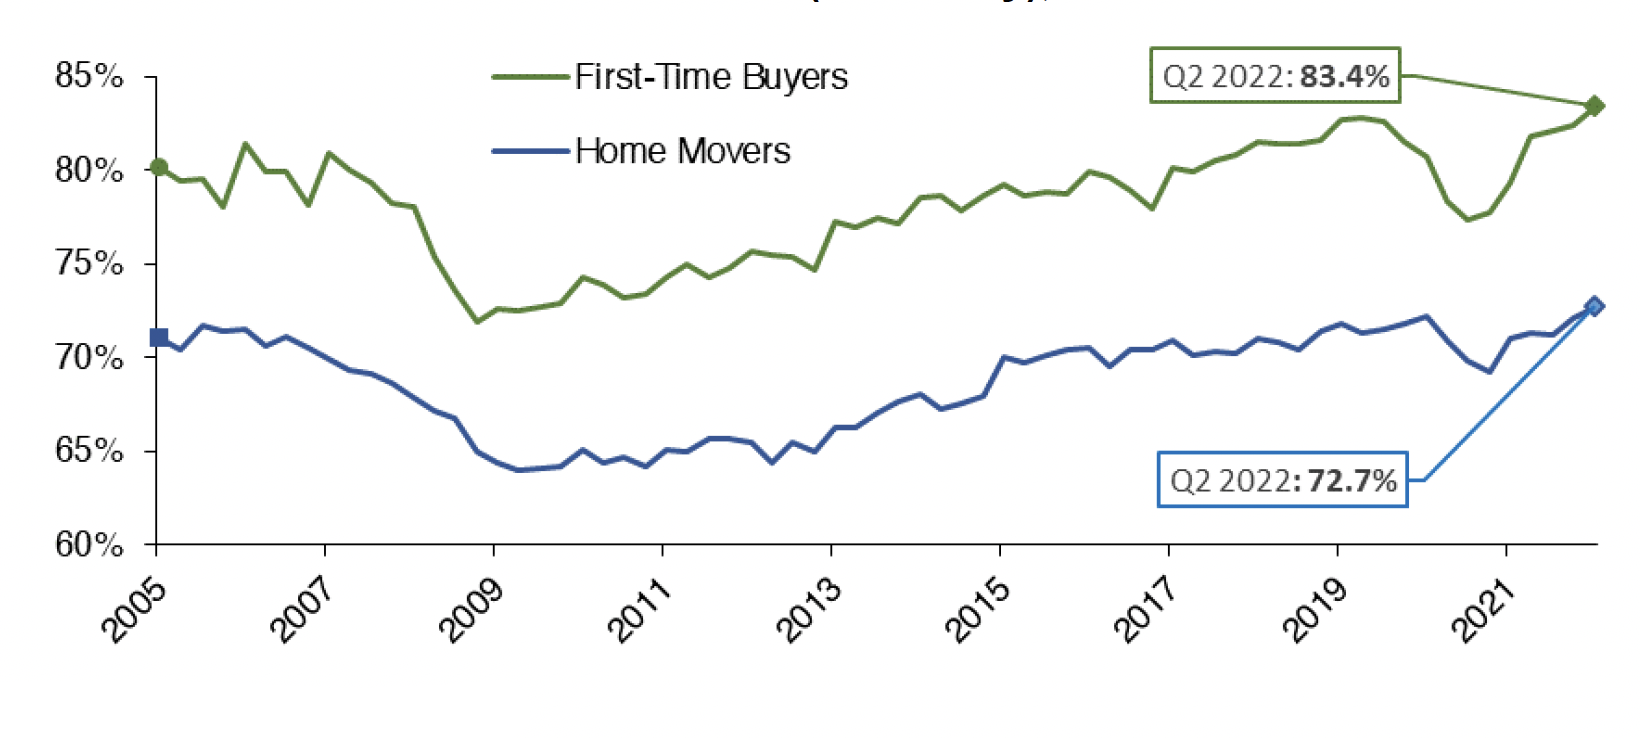 Chart 5.3 highlights how the mean loan-to-value (“LTV”) ratio has progressed over time for new mortgages advanced to both first-time-buyers and for home movers. The data covers the period from Q2 2005 to Q2 2022. 